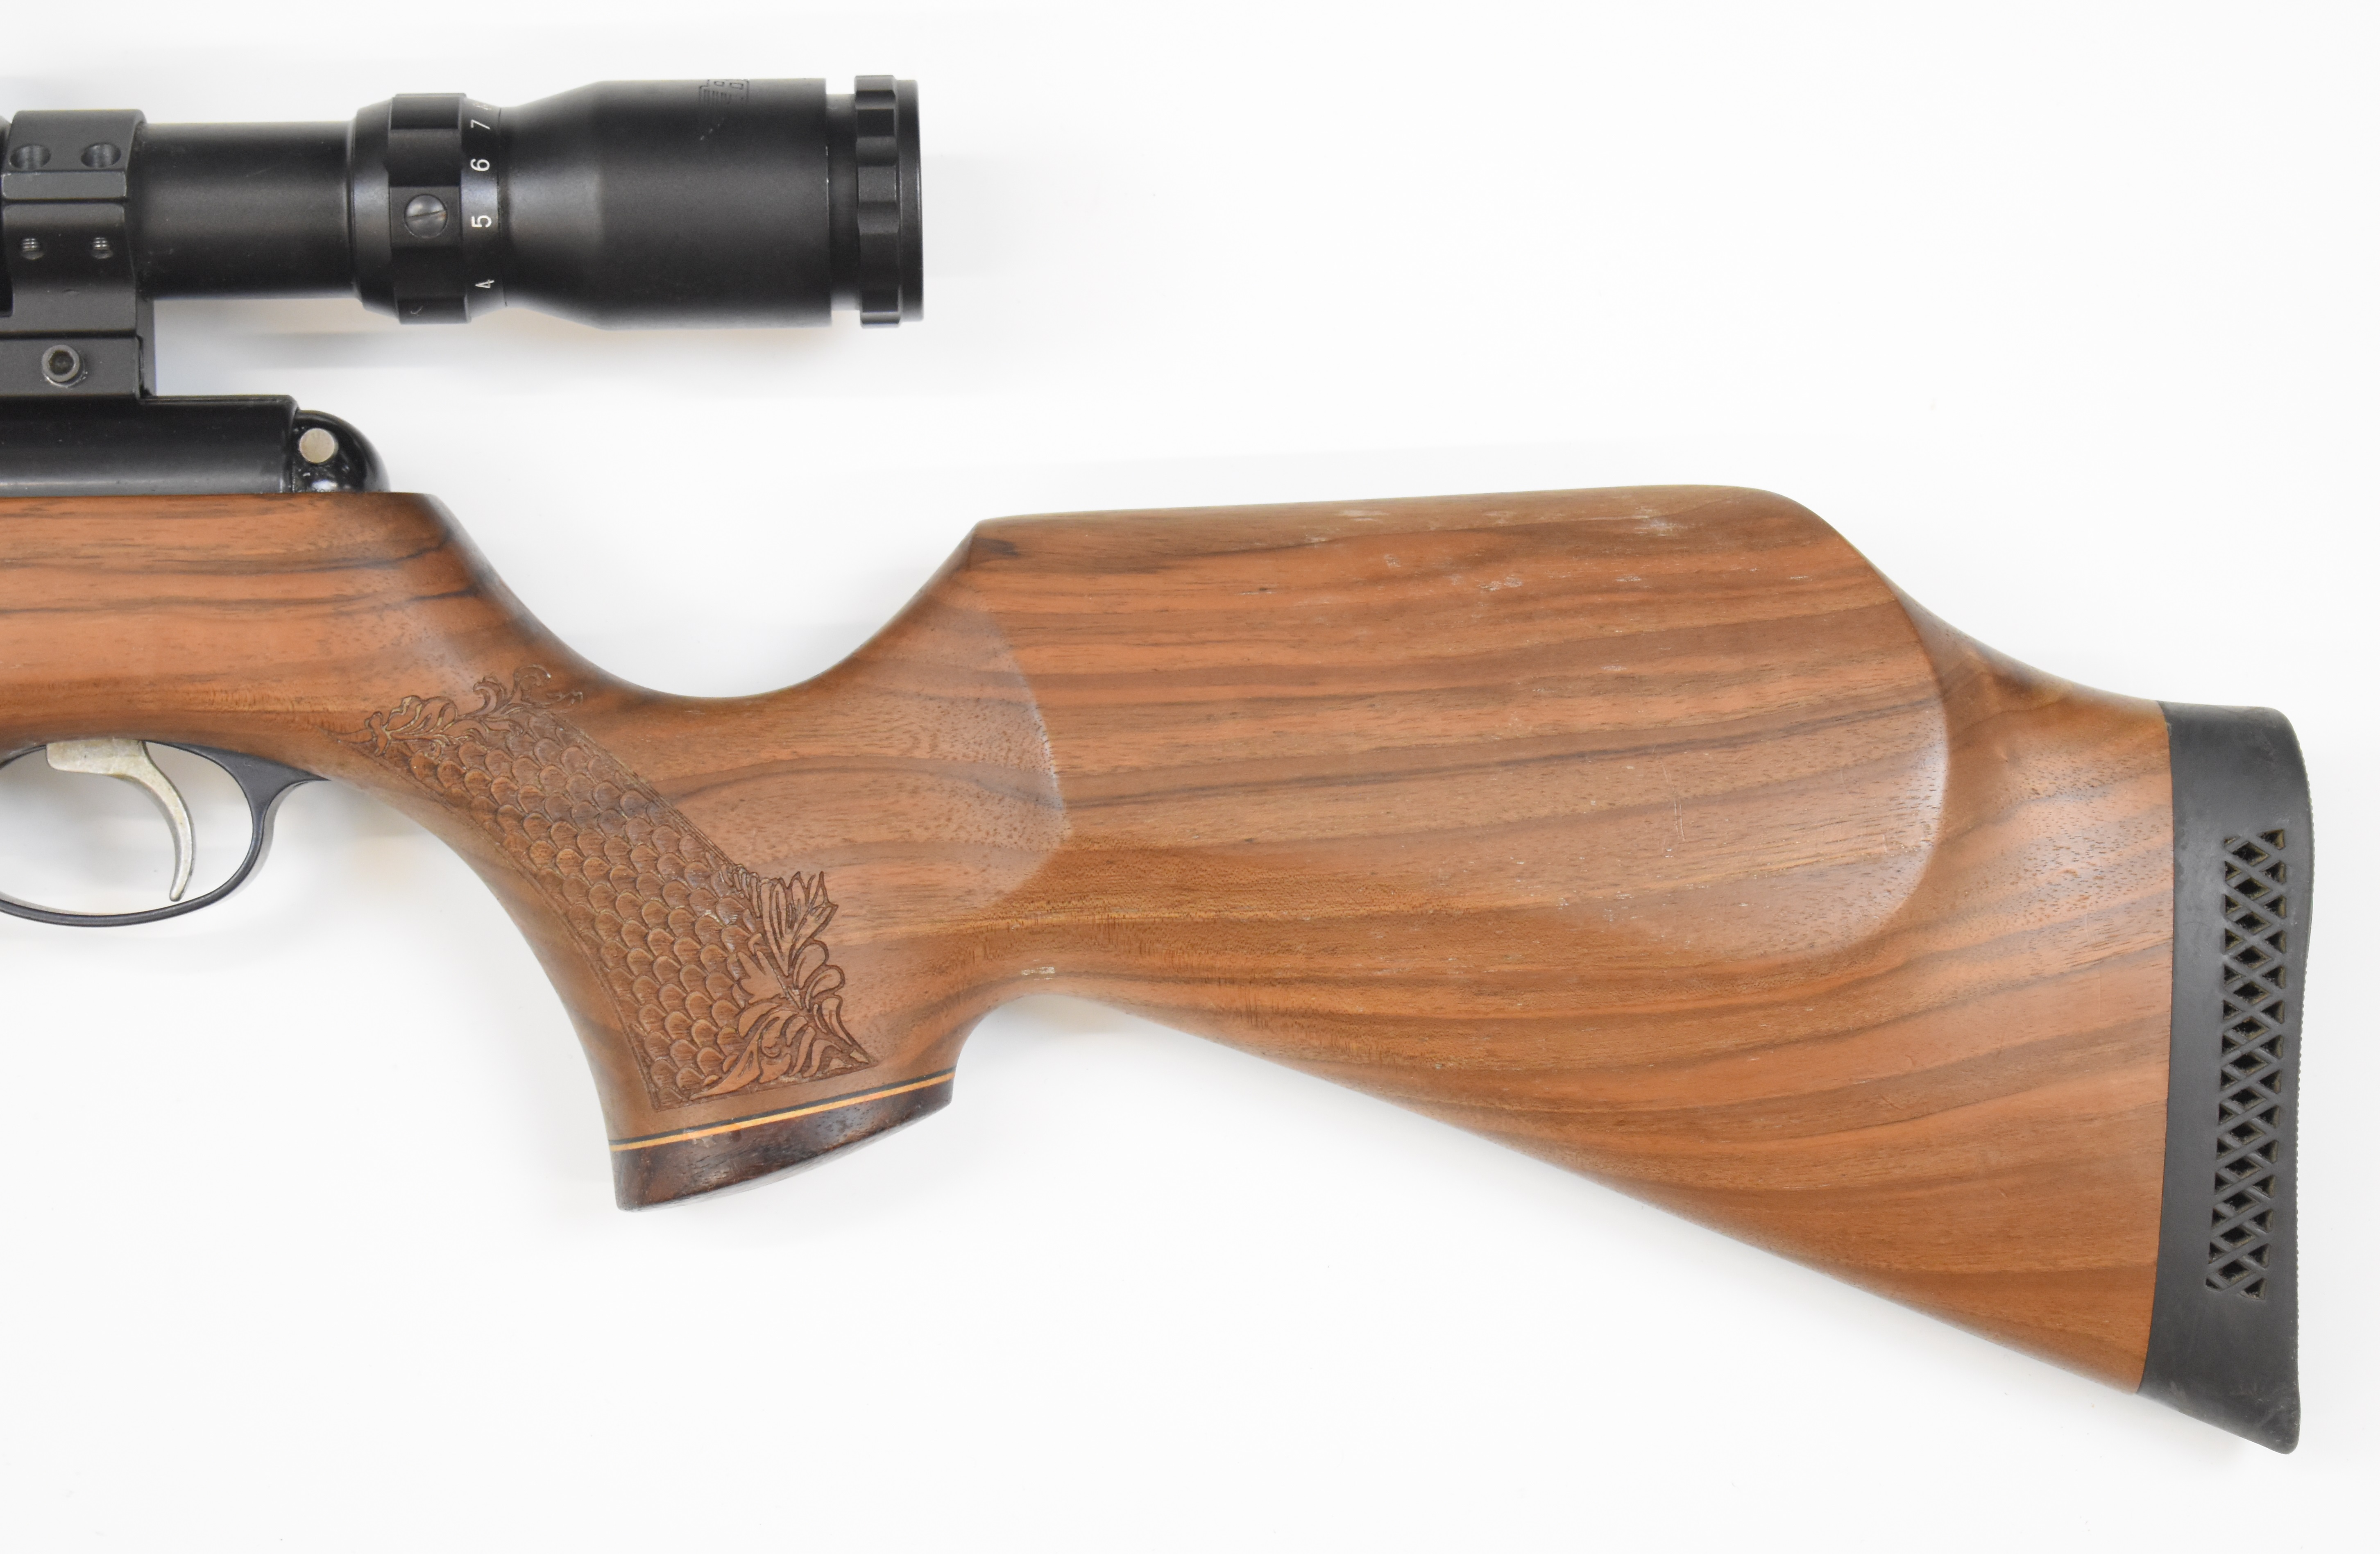 Air Arms TX200 .22 under-lever air rifle with carved semi-pistol grip and forend, adjustable - Image 7 of 9